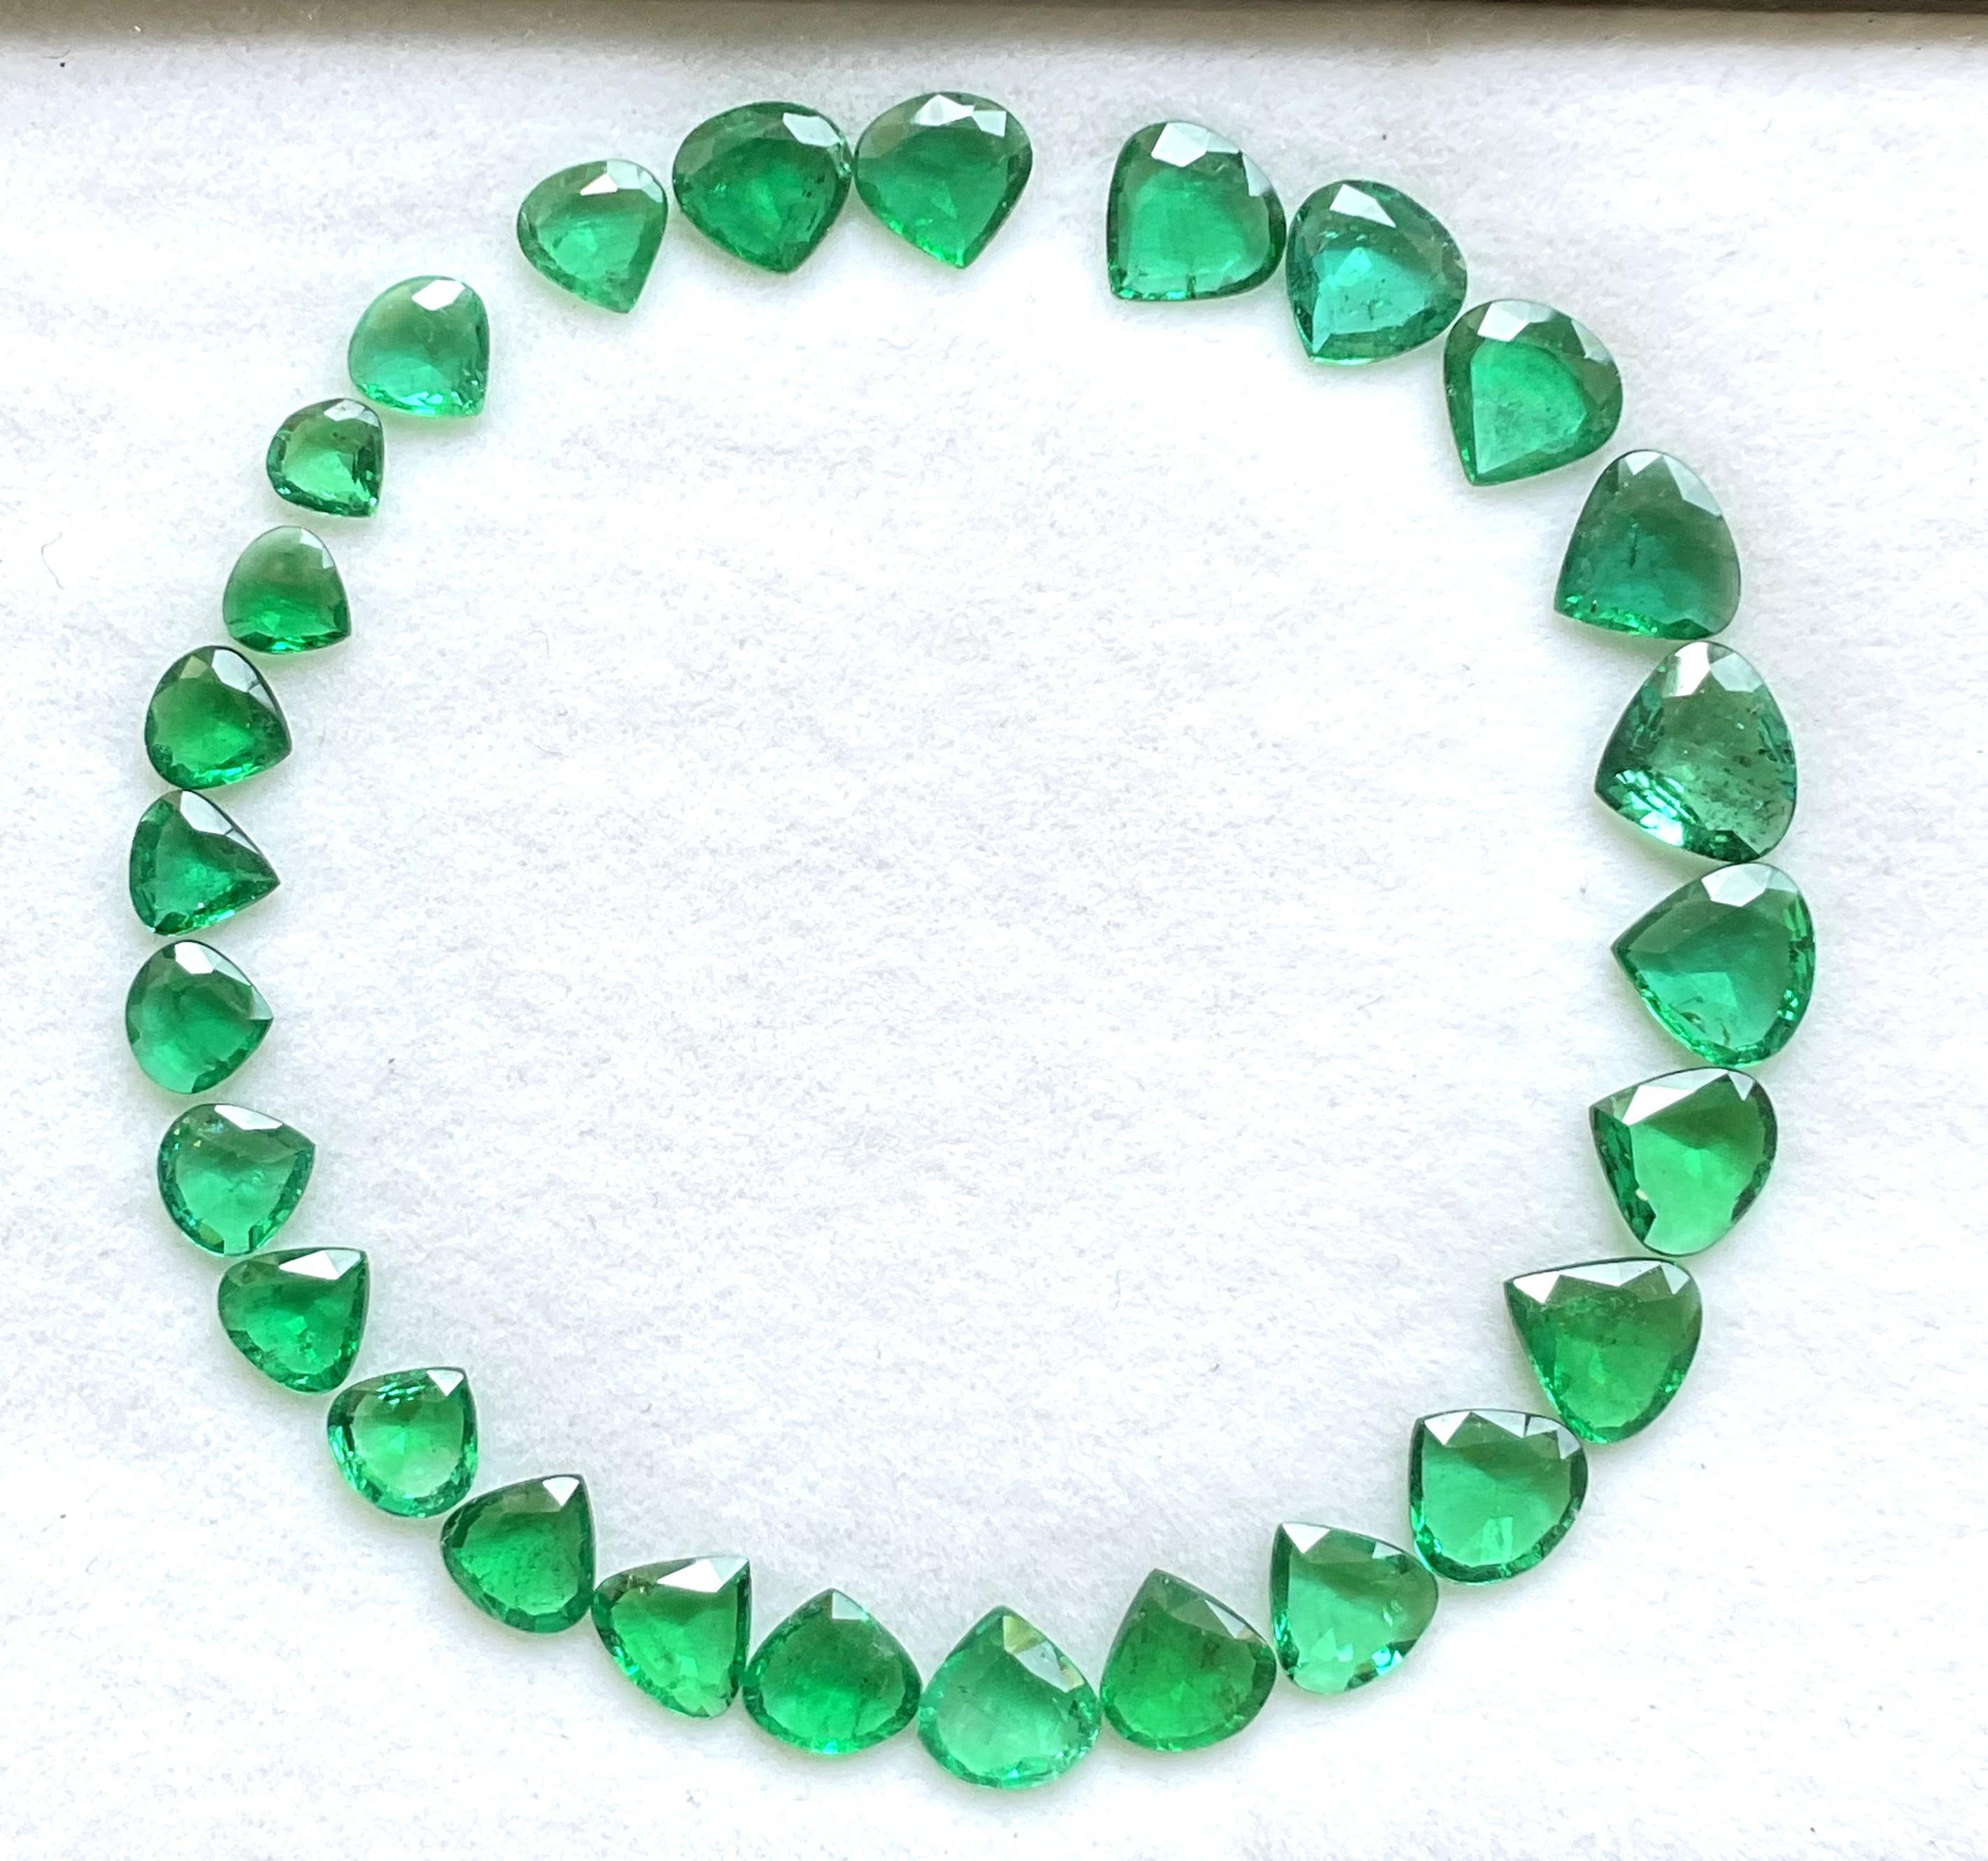 Heart Cut 19.52 cts Zambian Emerald Heart Layout Suite Faceted Cut stone for fine Jewelry